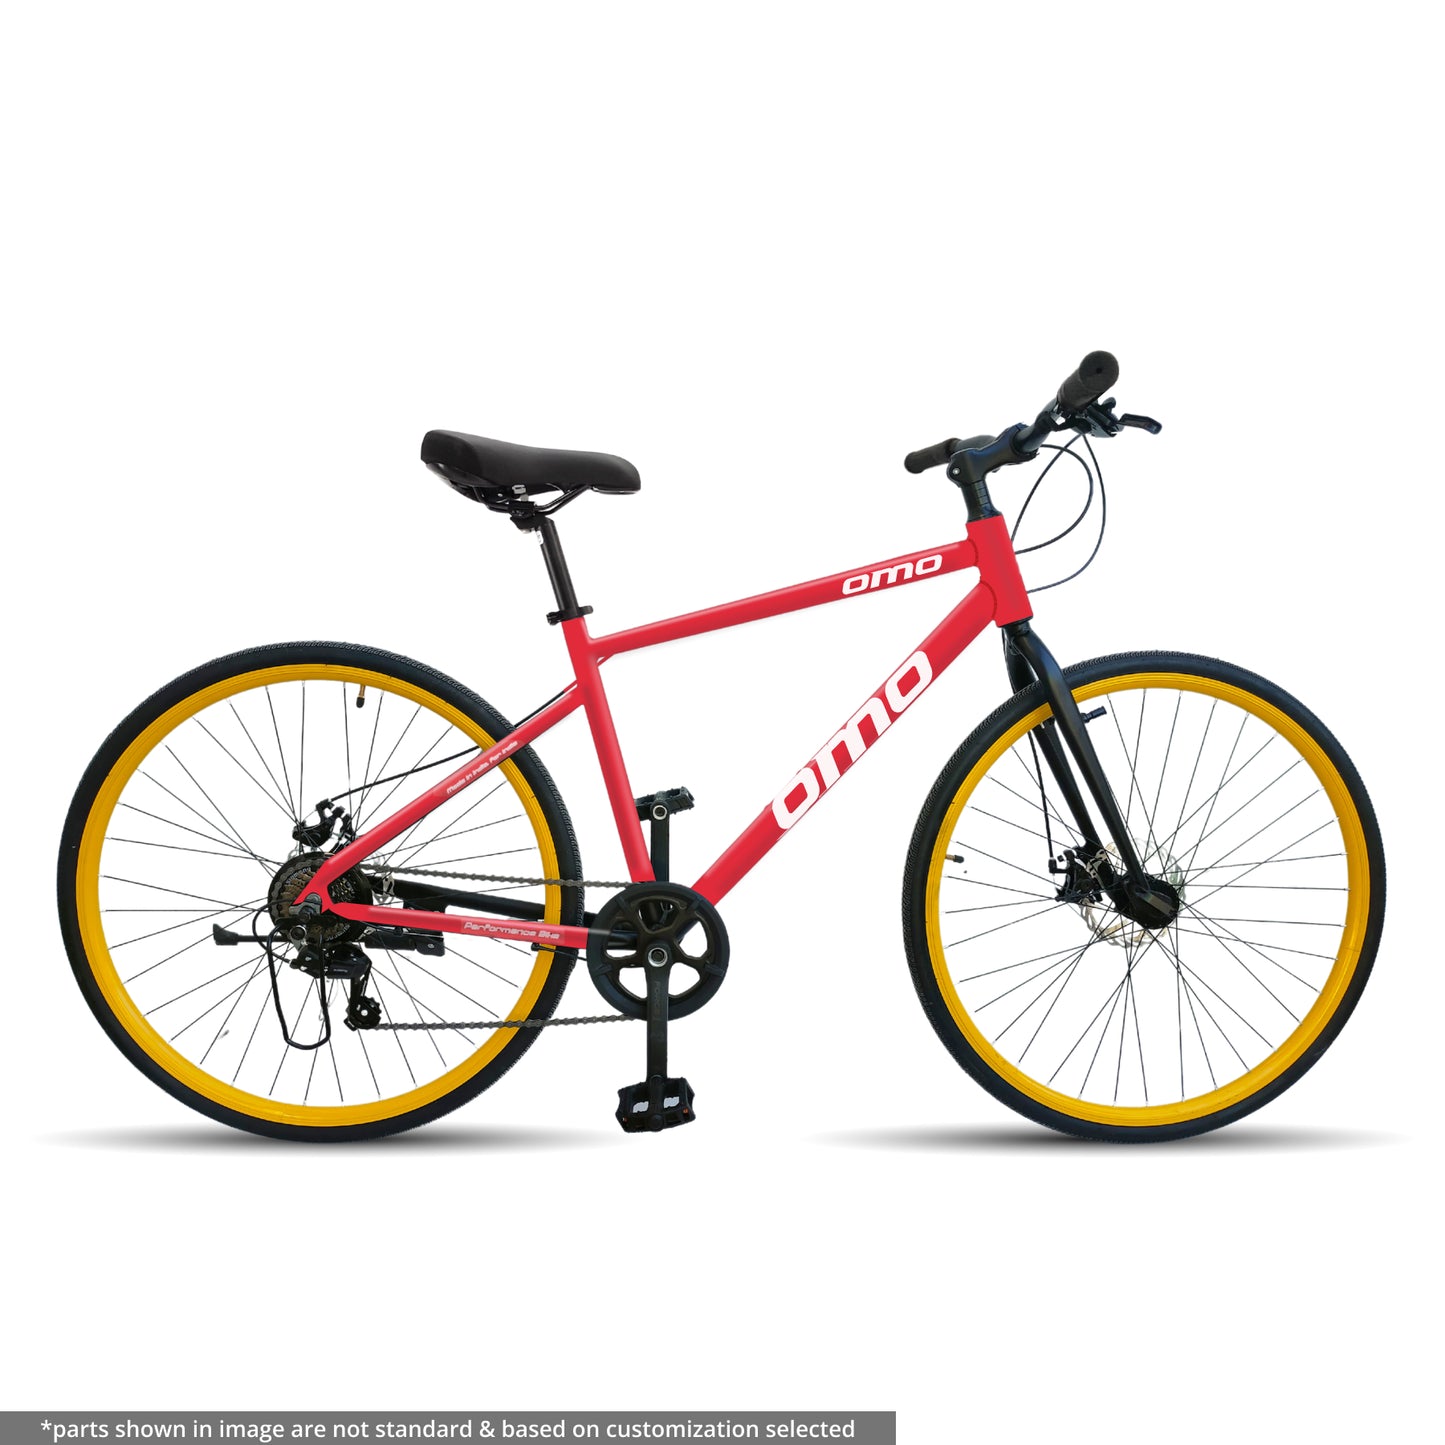 Alloy frame Light weight hybrid bike with 7 gear under 15000 in india by omobikes hampi red color yellow frame